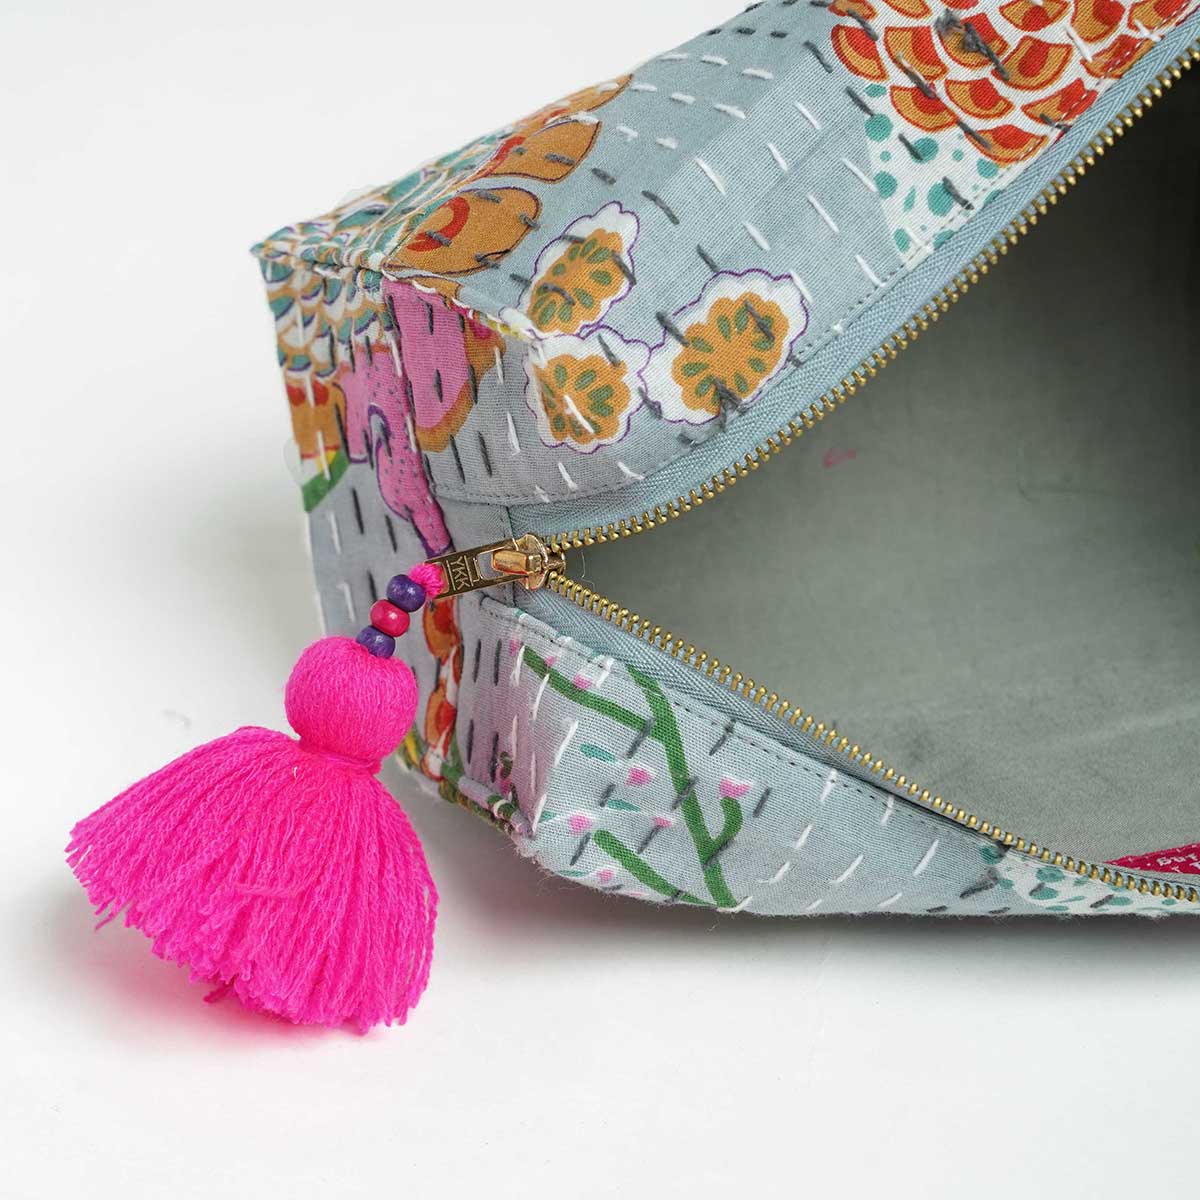 Grey printed utility kantha pouch, make up /cosmetic / toiletry bag